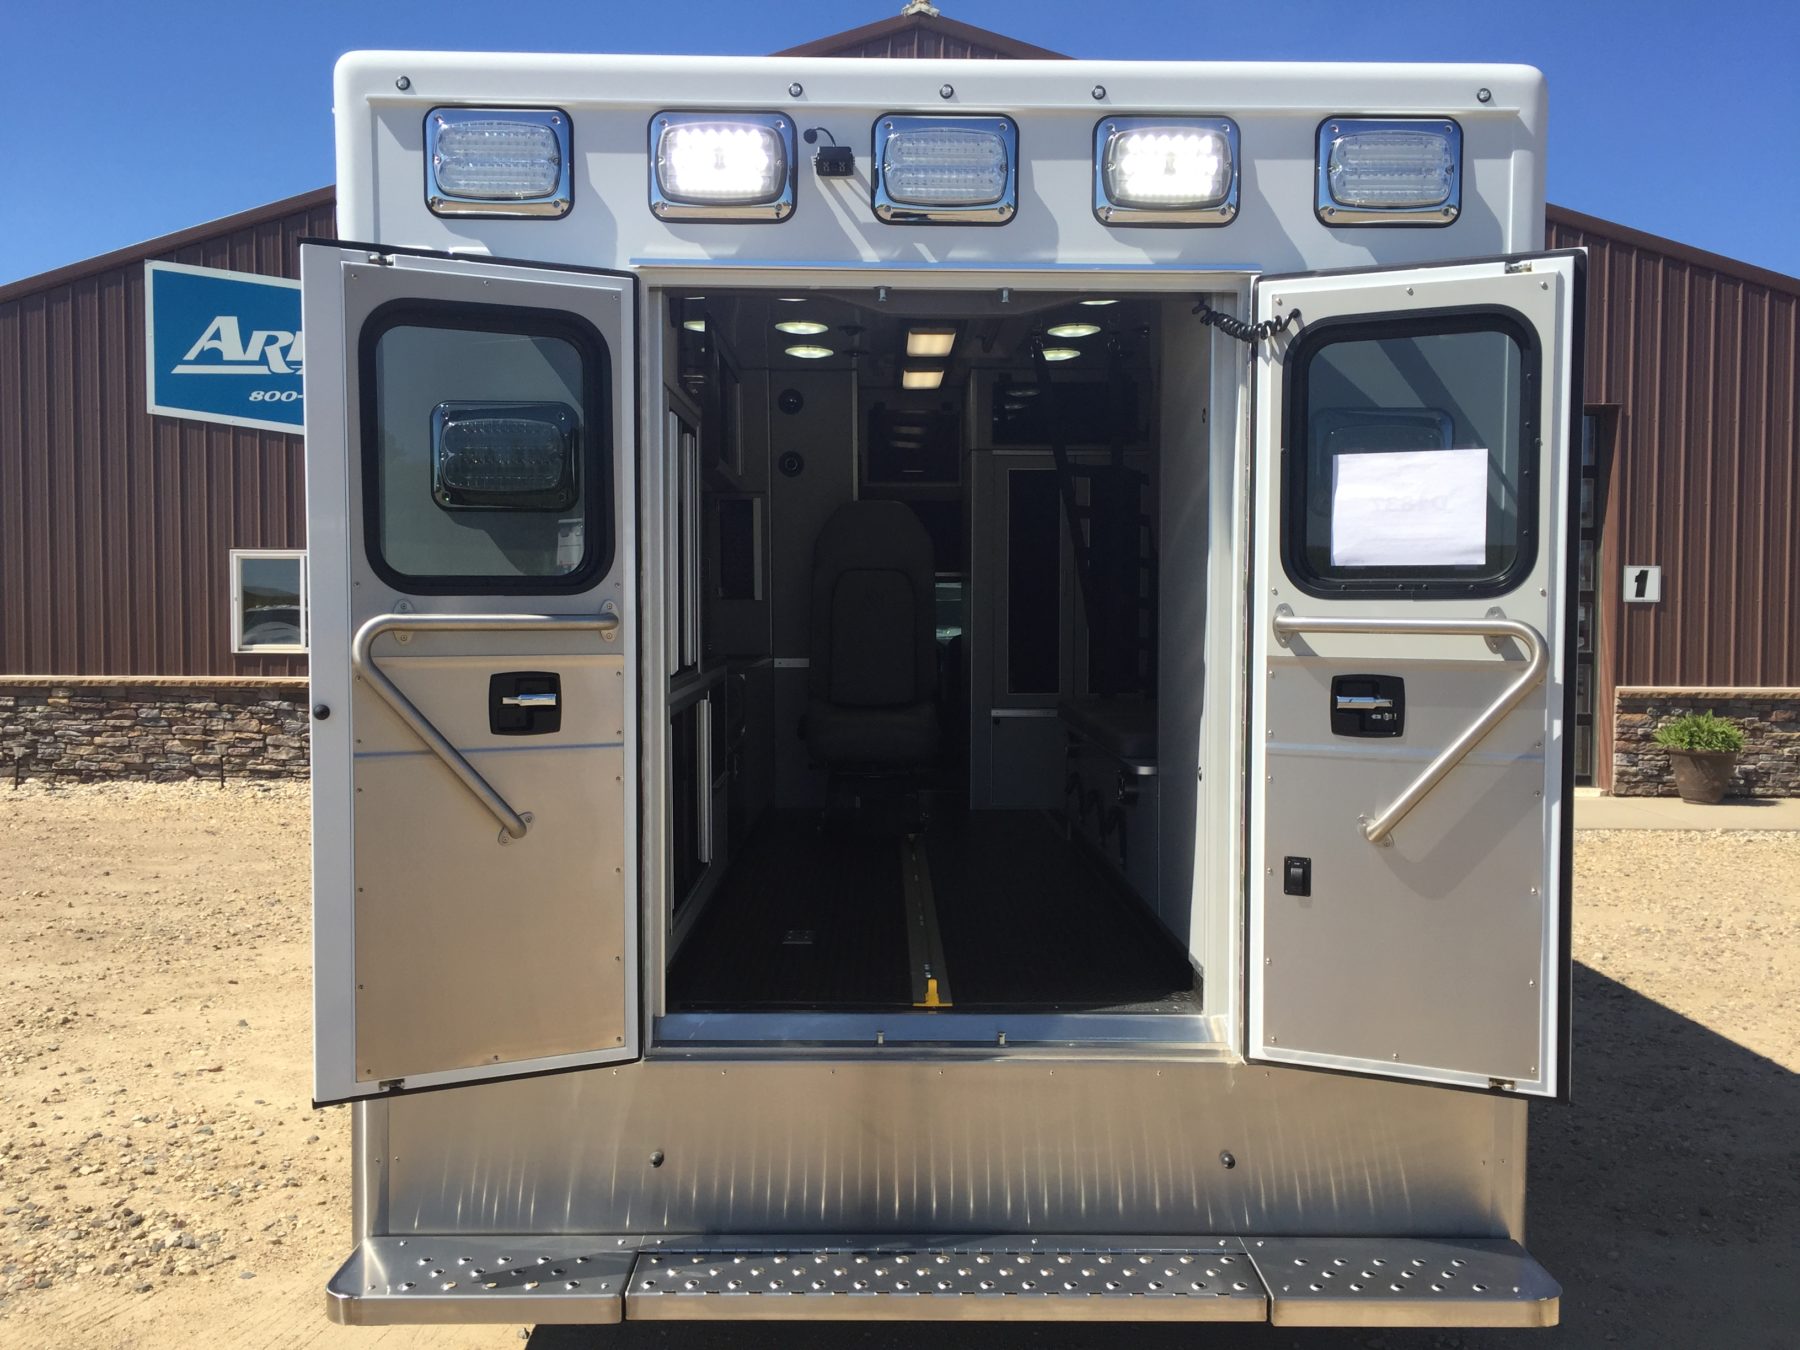 2019 Ford F450 4x4 Heavy Duty Ambulance For Sale – Picture 8